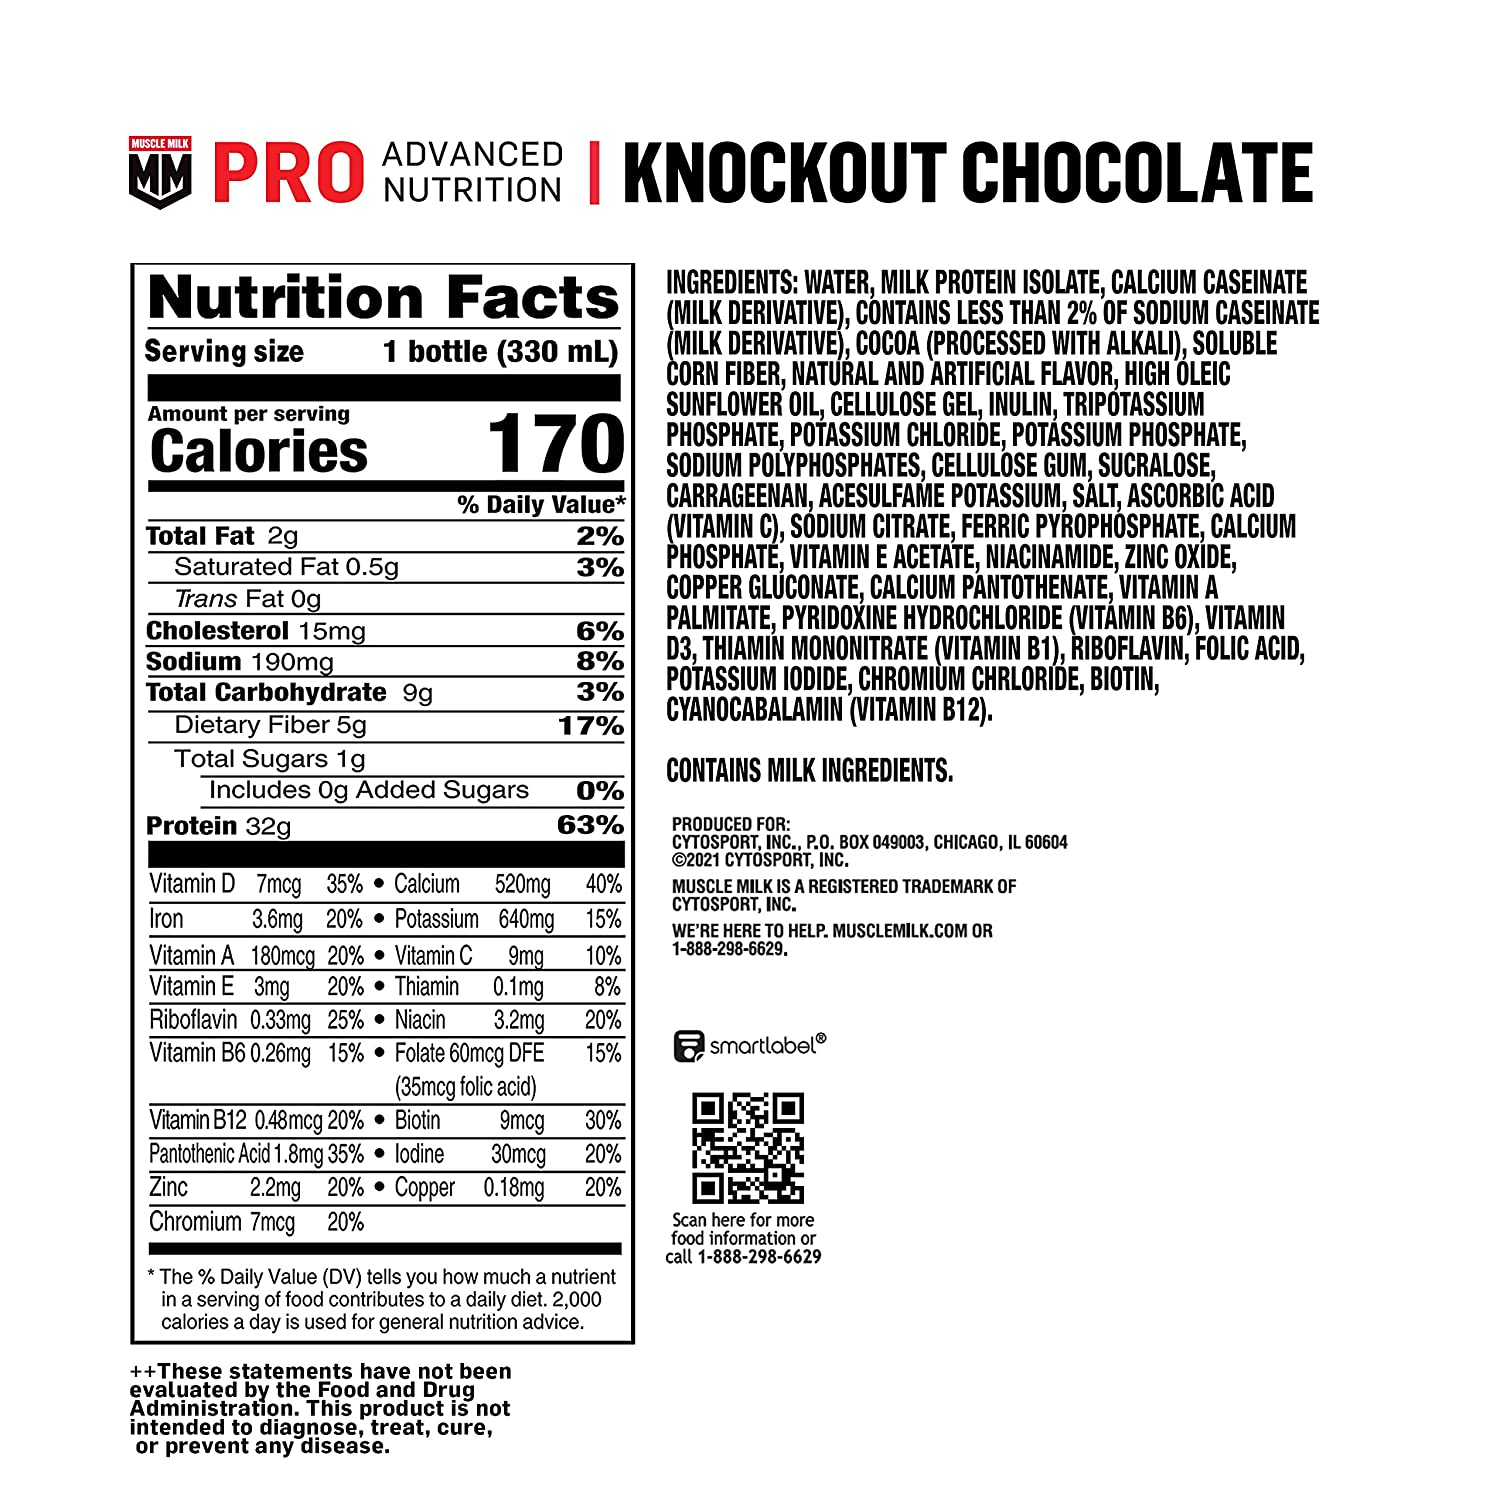 Muscle Milk Pro Advanced Nutrition Protein Shake, Knockout Chocolate, 11.16 Fl Oz Bottle, 12 Pack, 32G Protein, 1G Sugar, 16 Vitamins & Minerals, 5G Fiber, Workout Recovery, Energizing Snack, Packaging May Vary